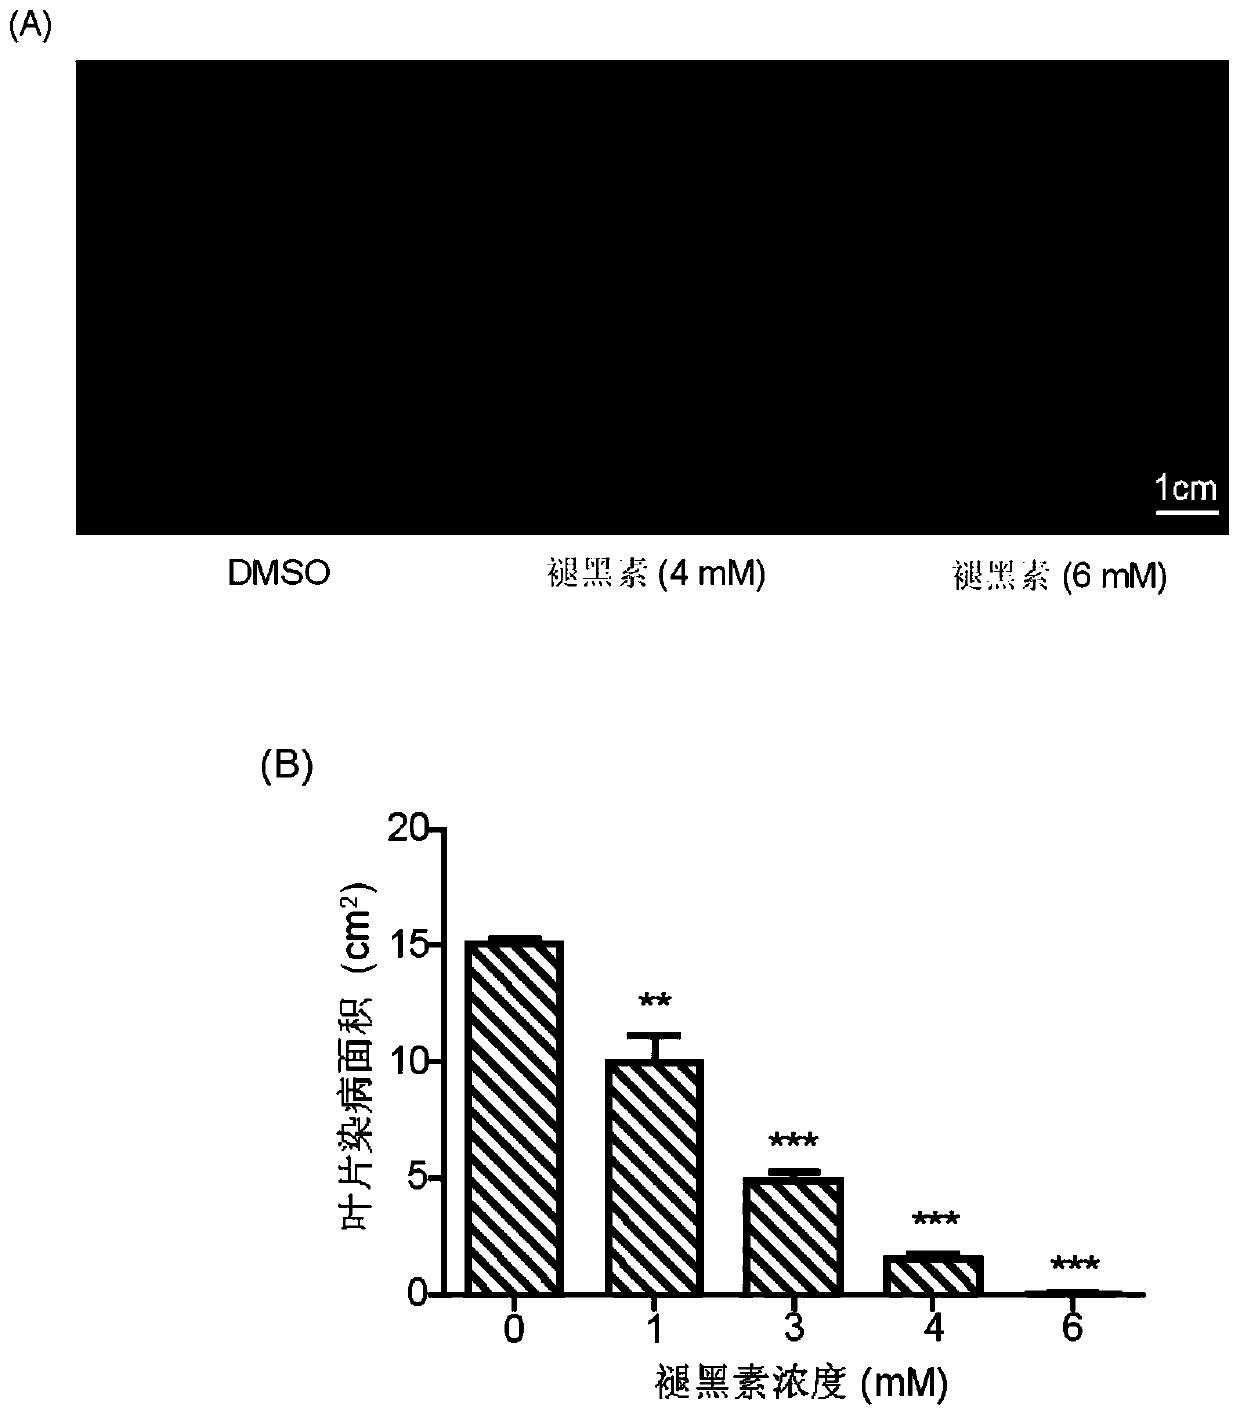 New application of melatonin in inhibiting plant oomycete diseases and new plant oomycete fungicide